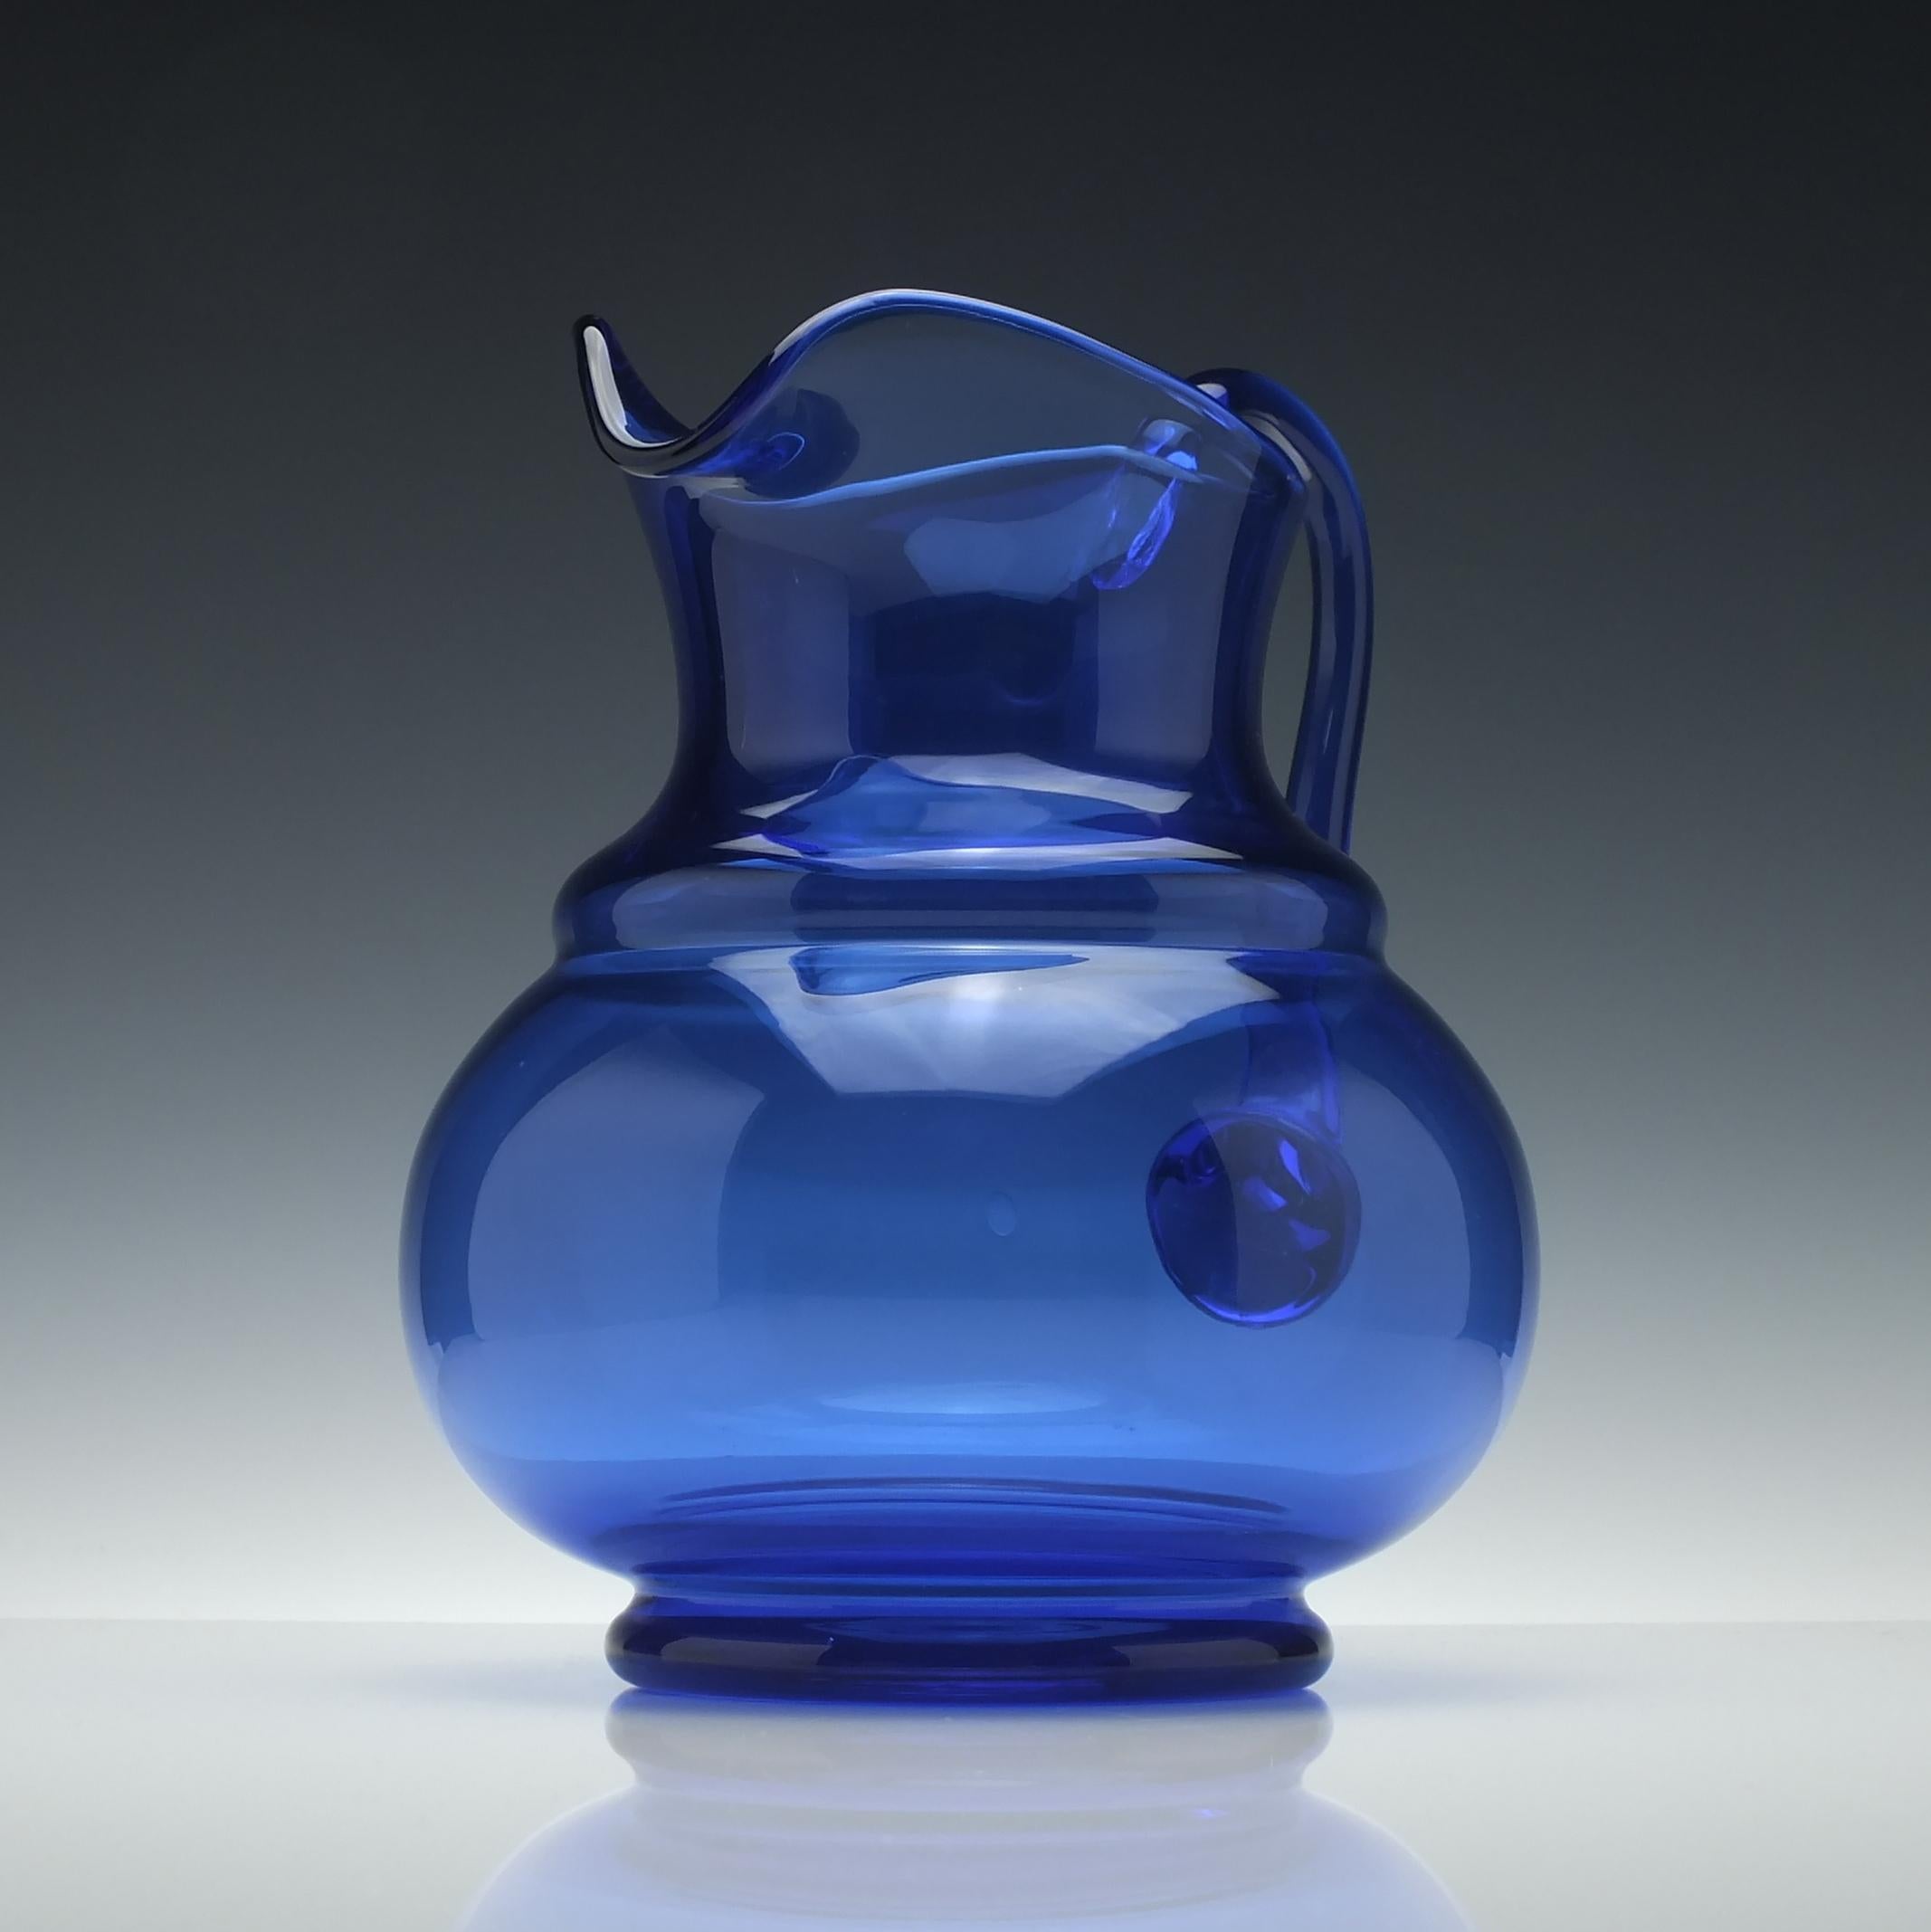 Date and origin 

England, circa 1880. Period of Victoria.

Condition

Excellent, age-related wear as shown. 

Dimensions:

Height 22.4cm, diameter 22.2cm

Weight

1313 grams

Technical description 

A 19th century blue glass water